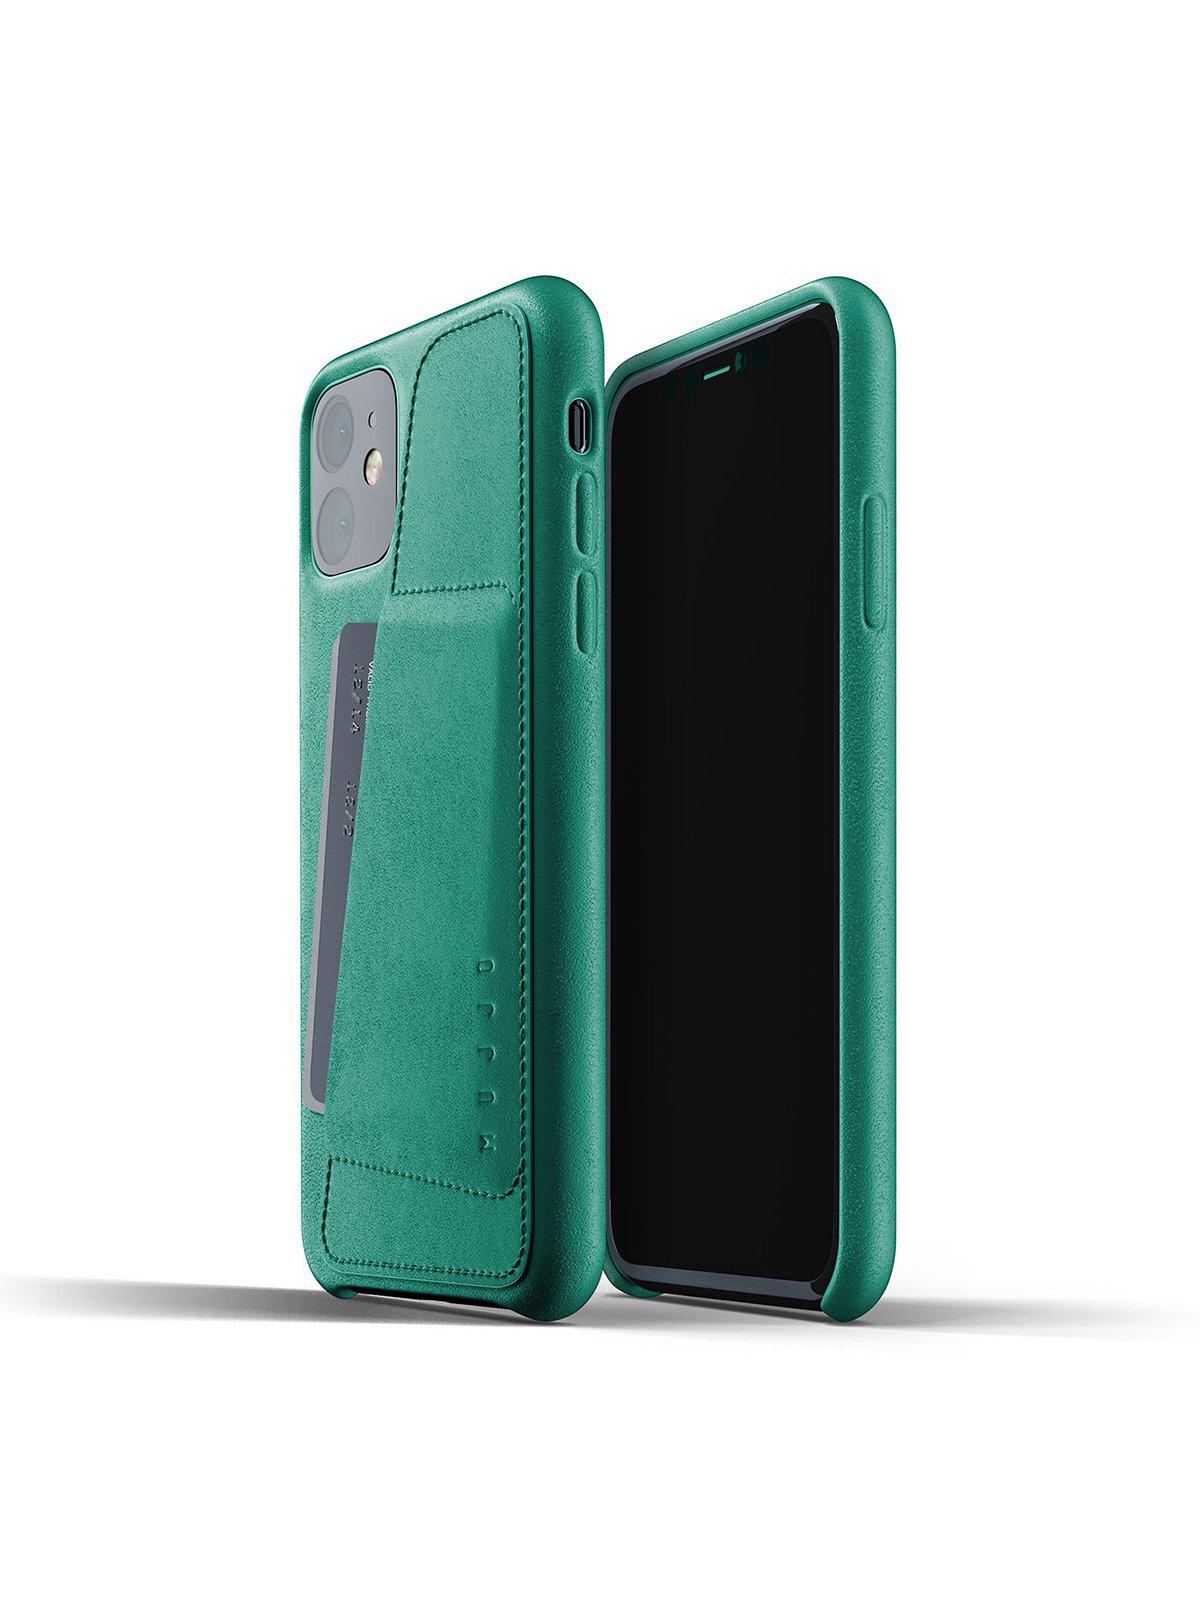 Mujjo Full Leather Wallet Case for iPhone 11 Alpine Green - MORE by Morello Indonesia